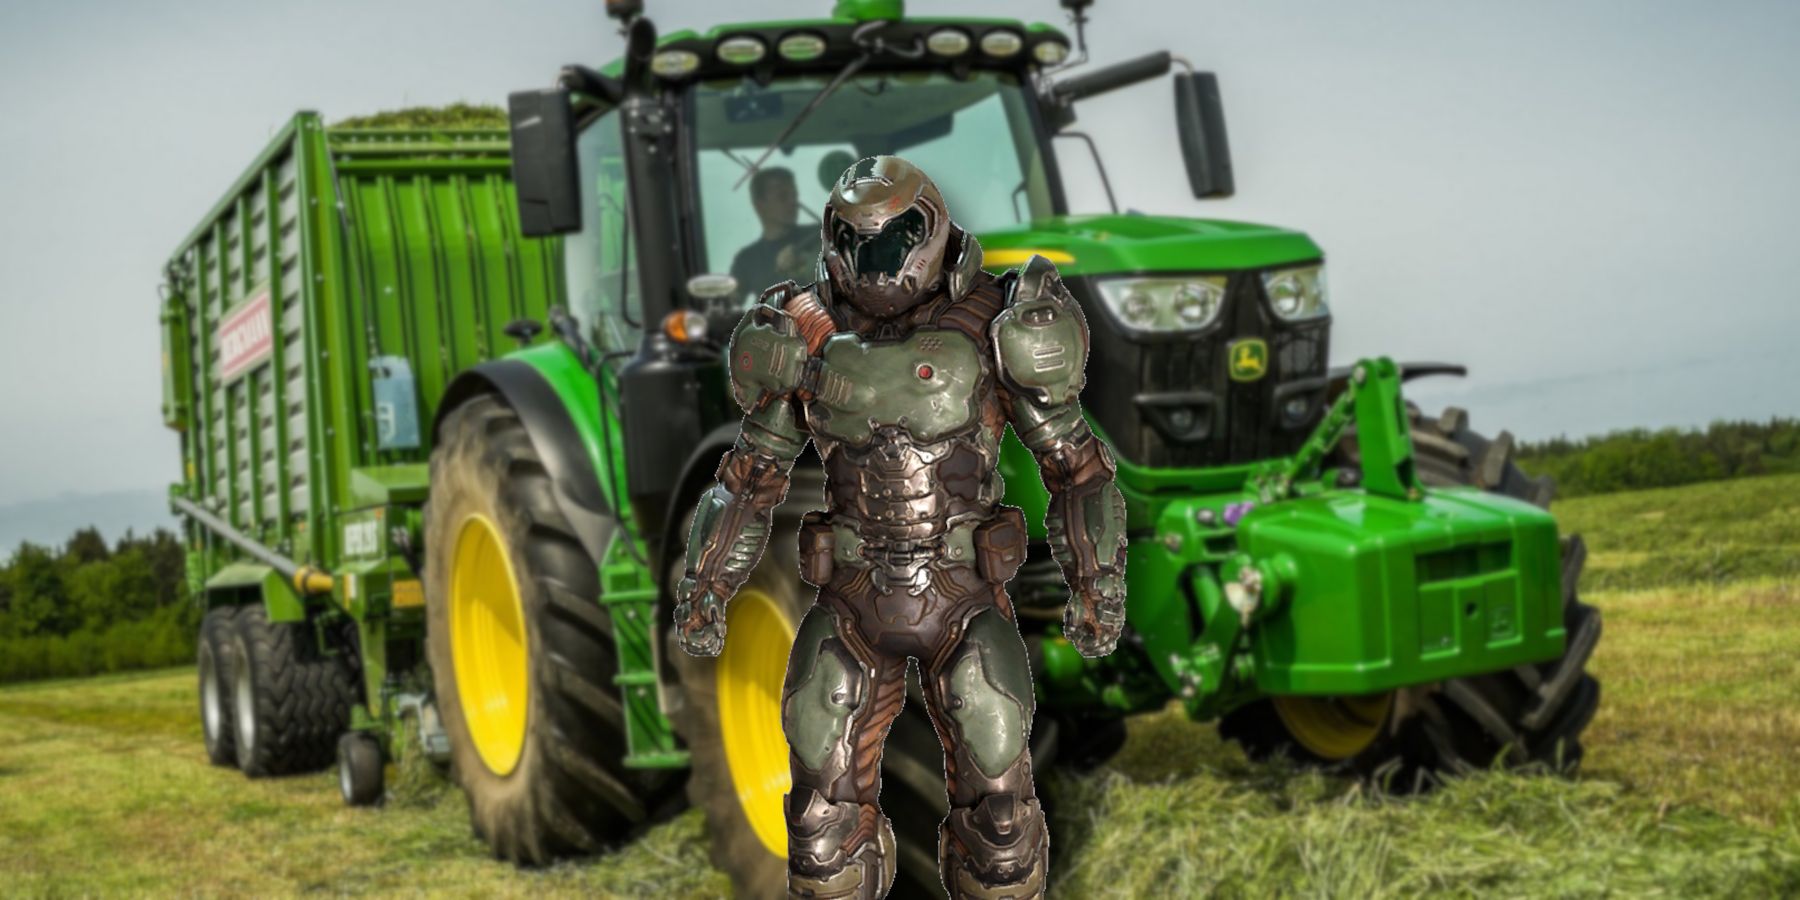 An image of the Doomslayer from Doom stood in front of a John Deere tractor.